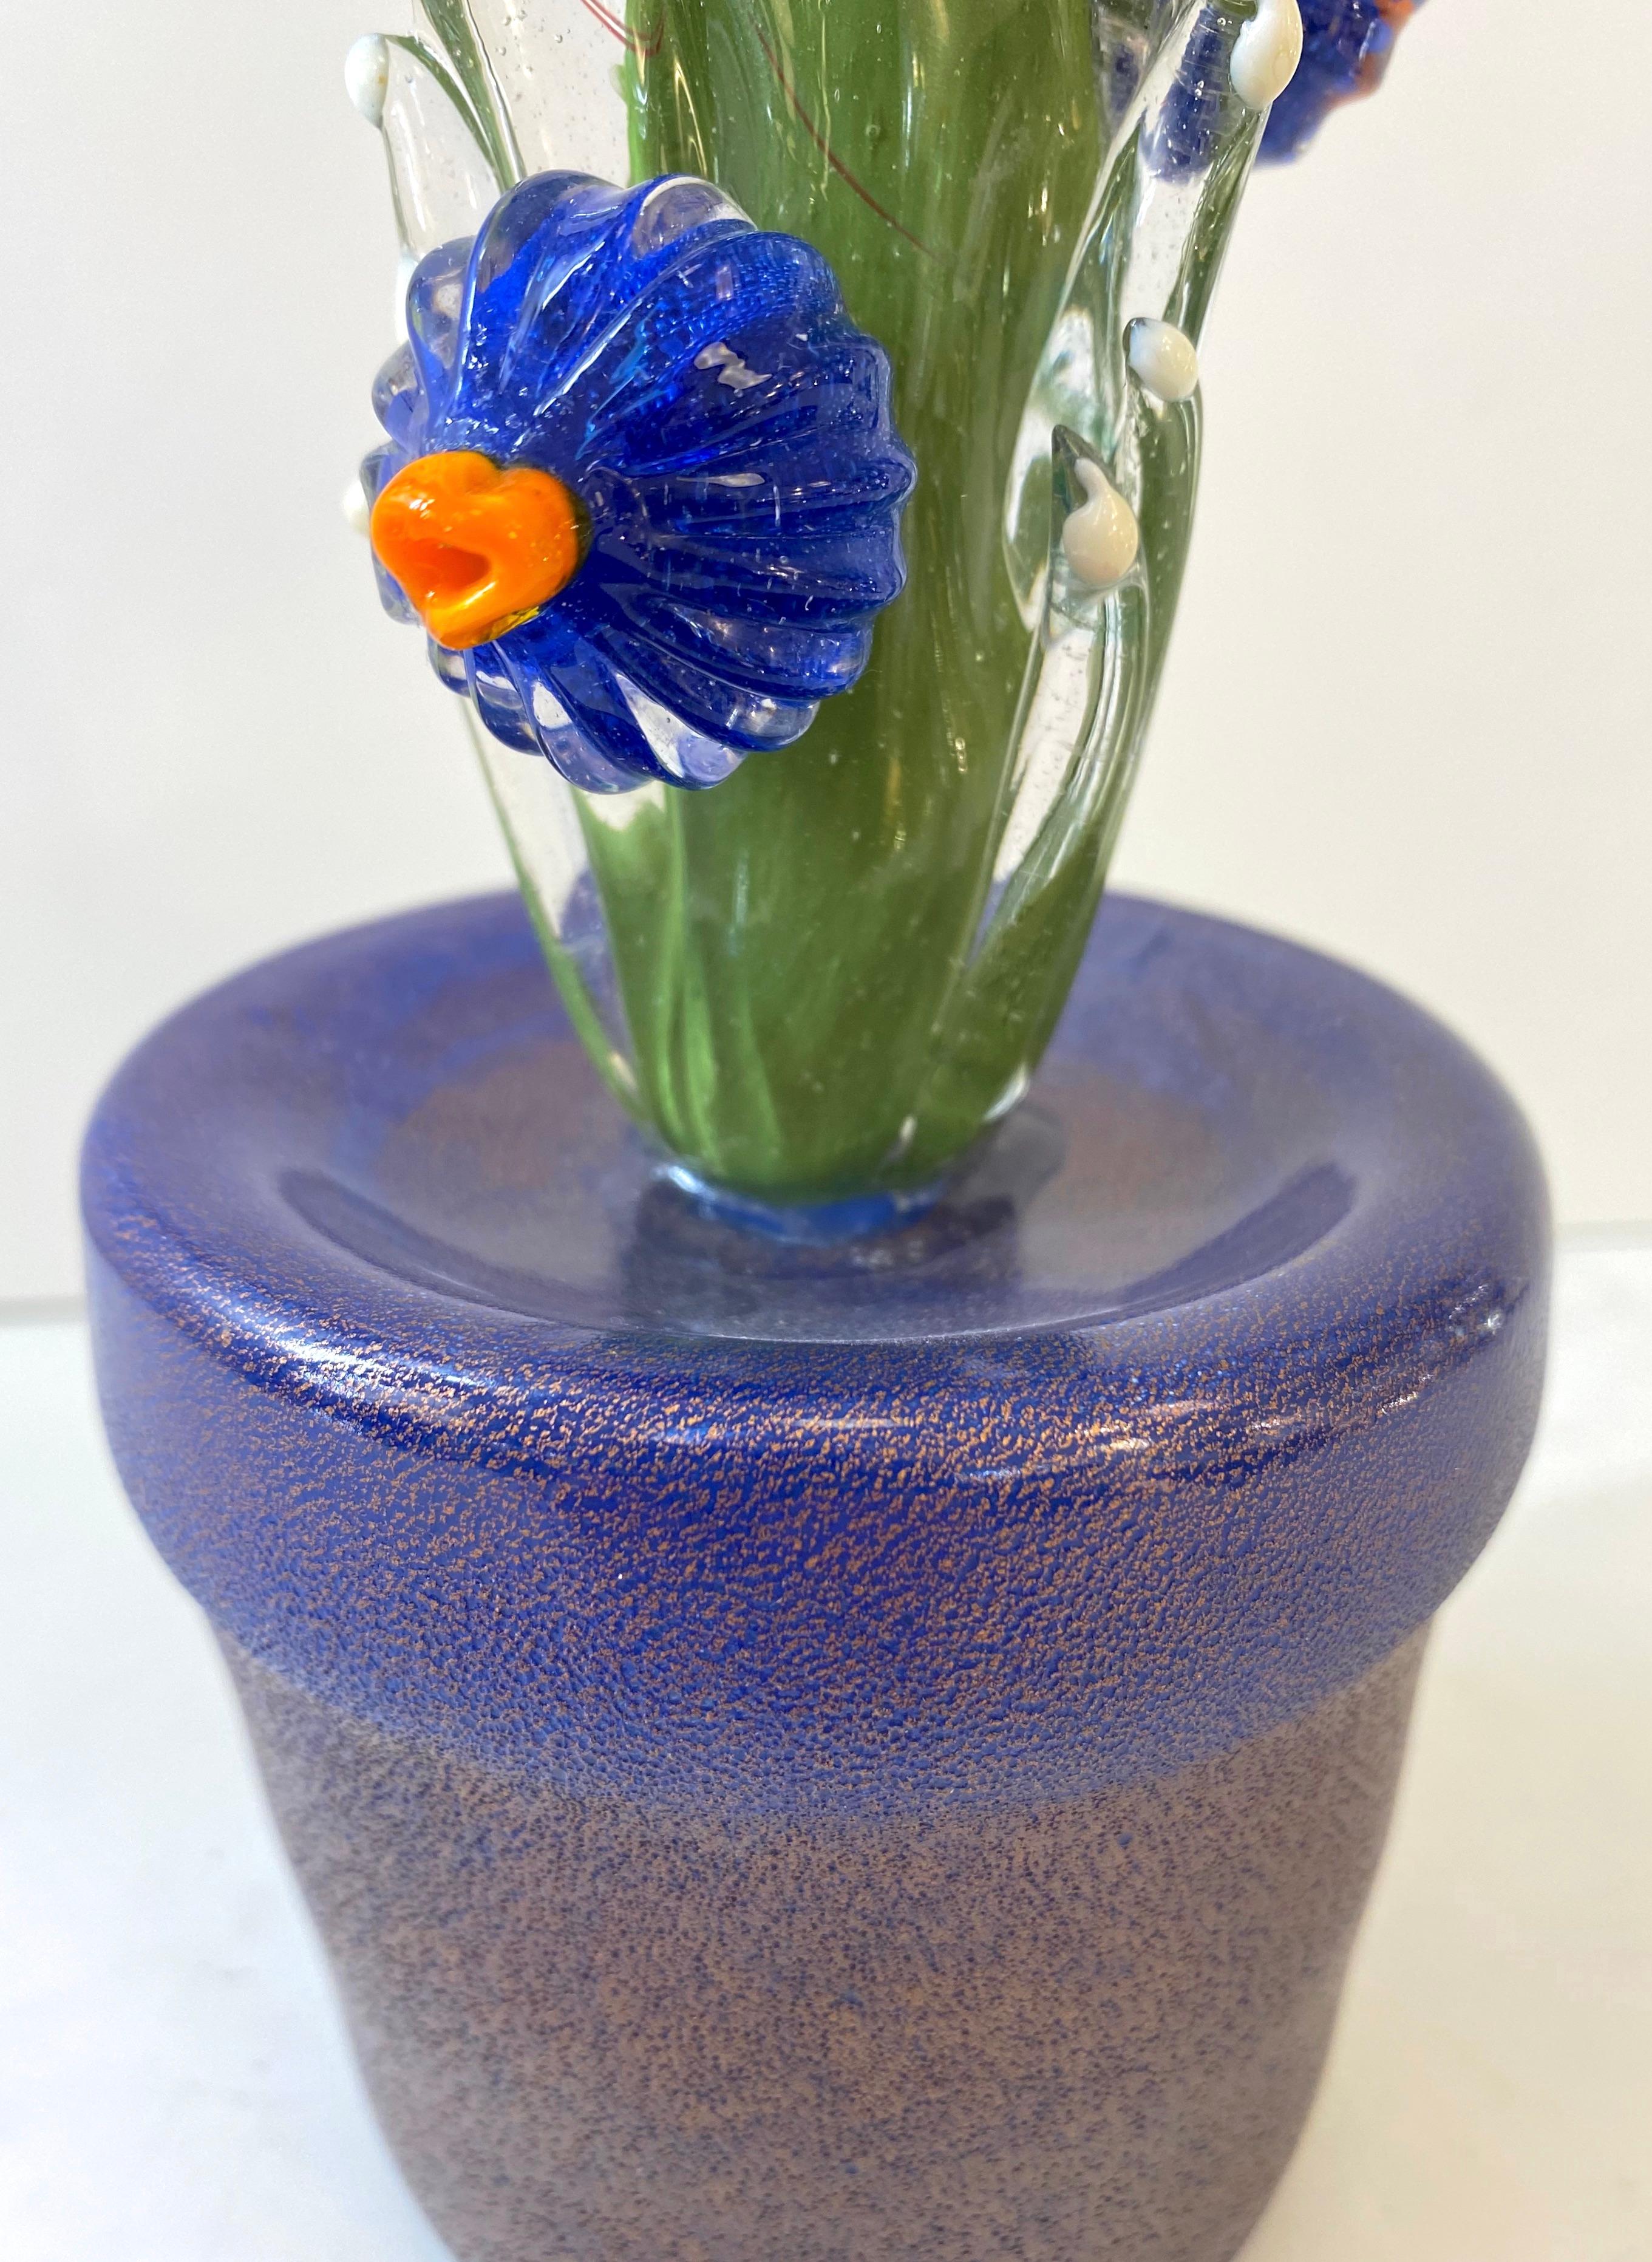 2000s Italian Moss Green Gold Murano Art Glass Cactus Plant with Blue Flowers  For Sale 3